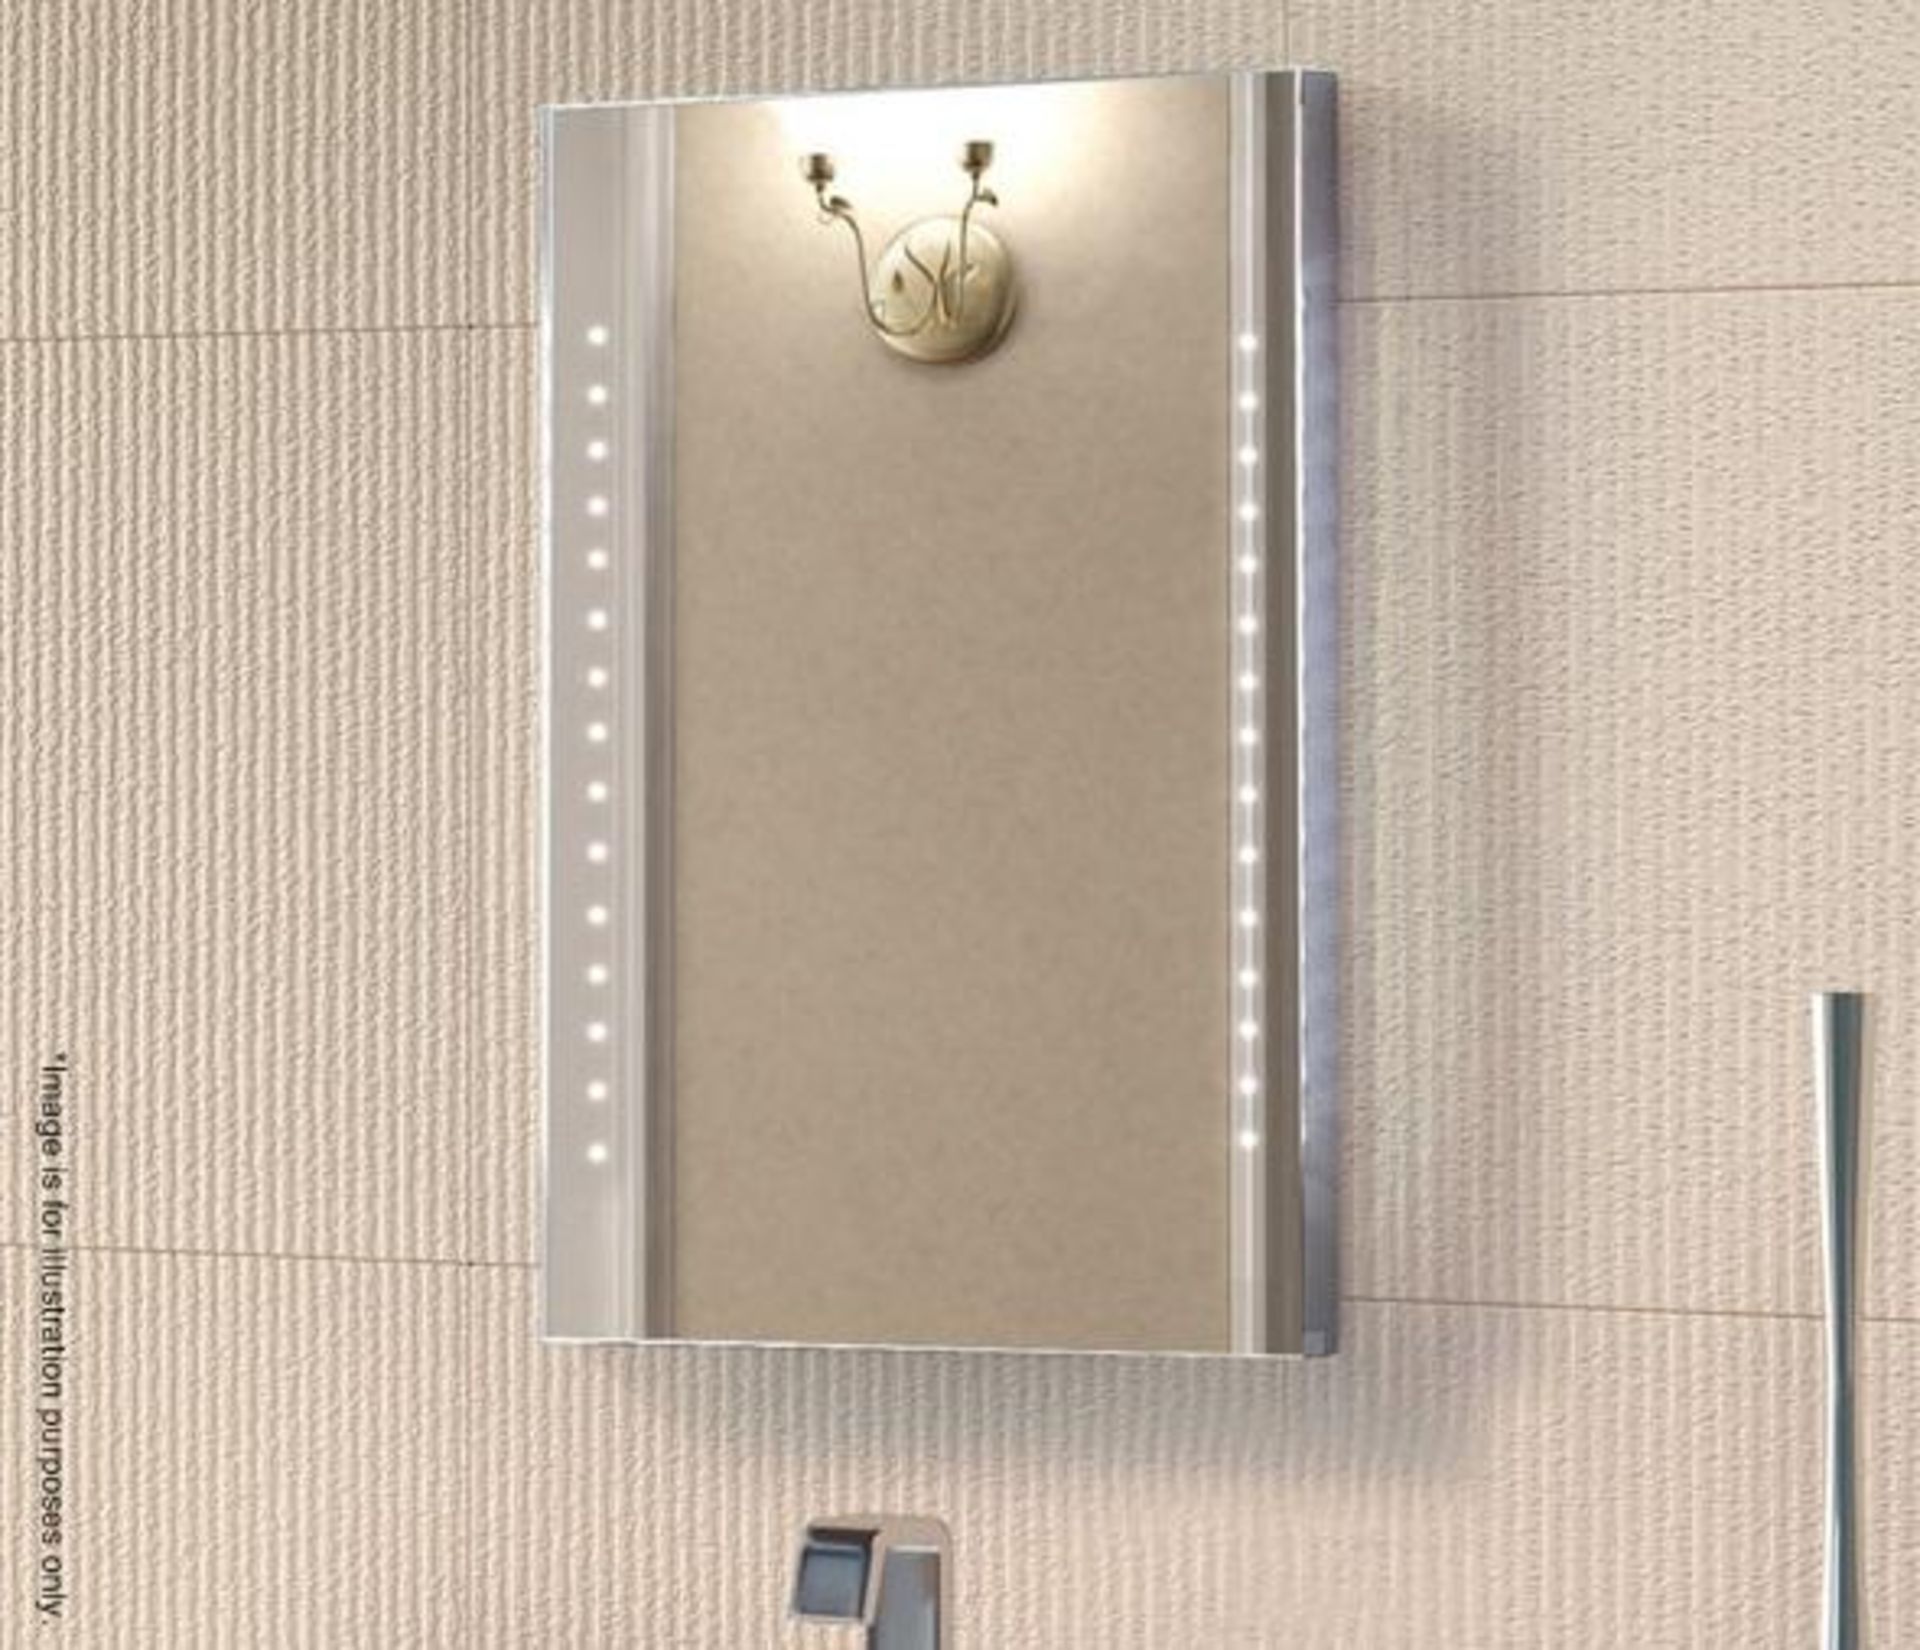 1 x Synergy Illuminated Bathroom Mirror With Demister & Infra-Red Switch and Clock (SY-IL-8)- 600x80